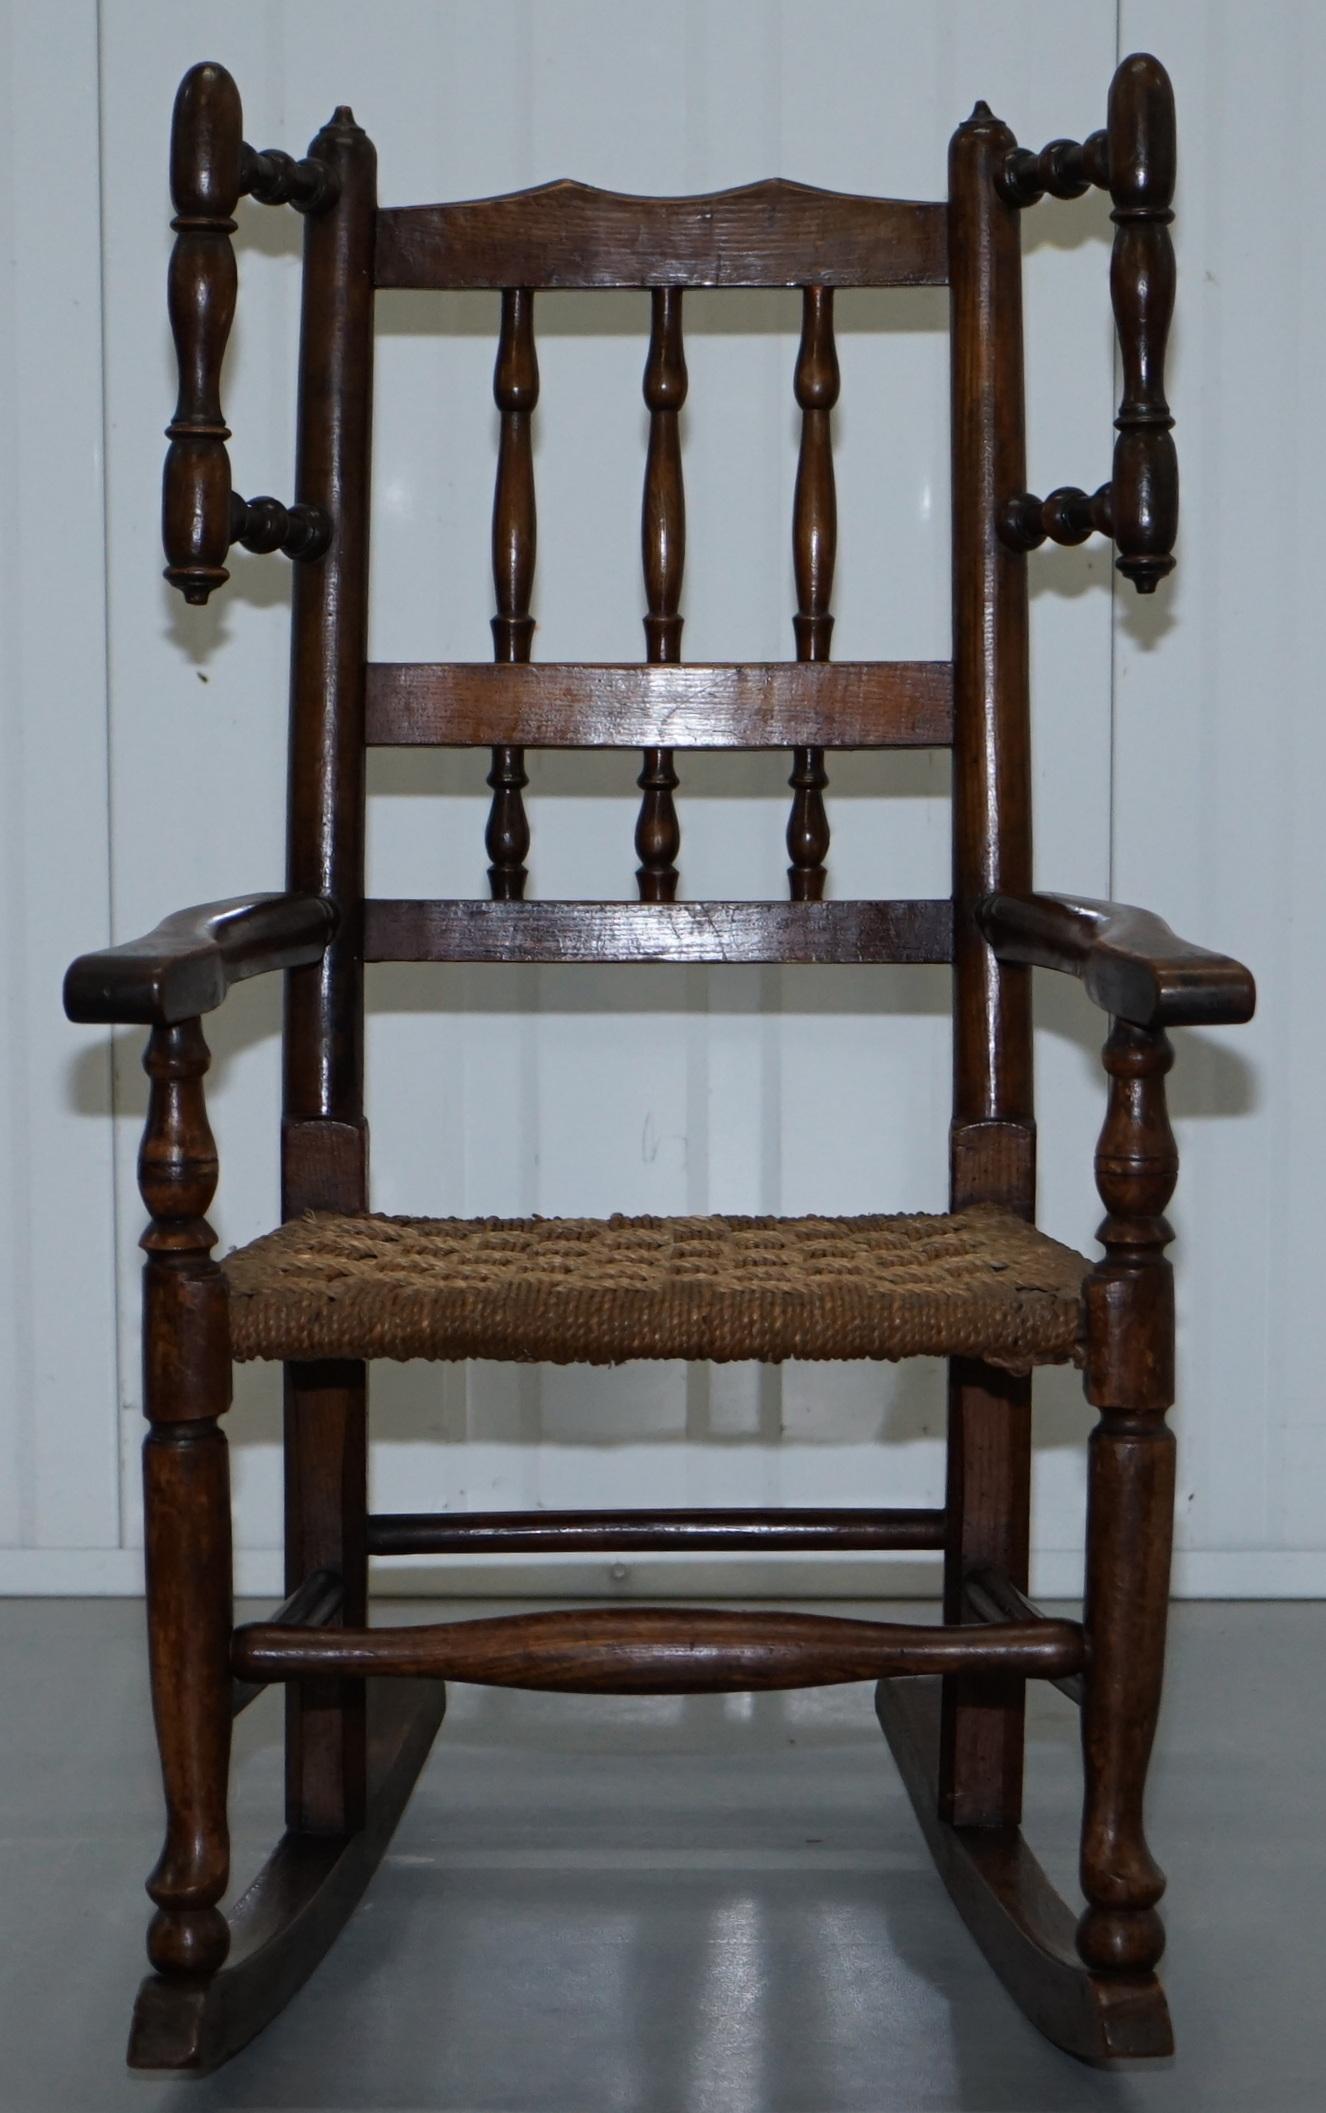 We are delighted to offer for sale this stunning original Georgian Children’s woven rope seat solid Elm rocking chair

A very good looking and well-made piece, this chair is in lightly restored fully functioning condition throughout, it’s a period